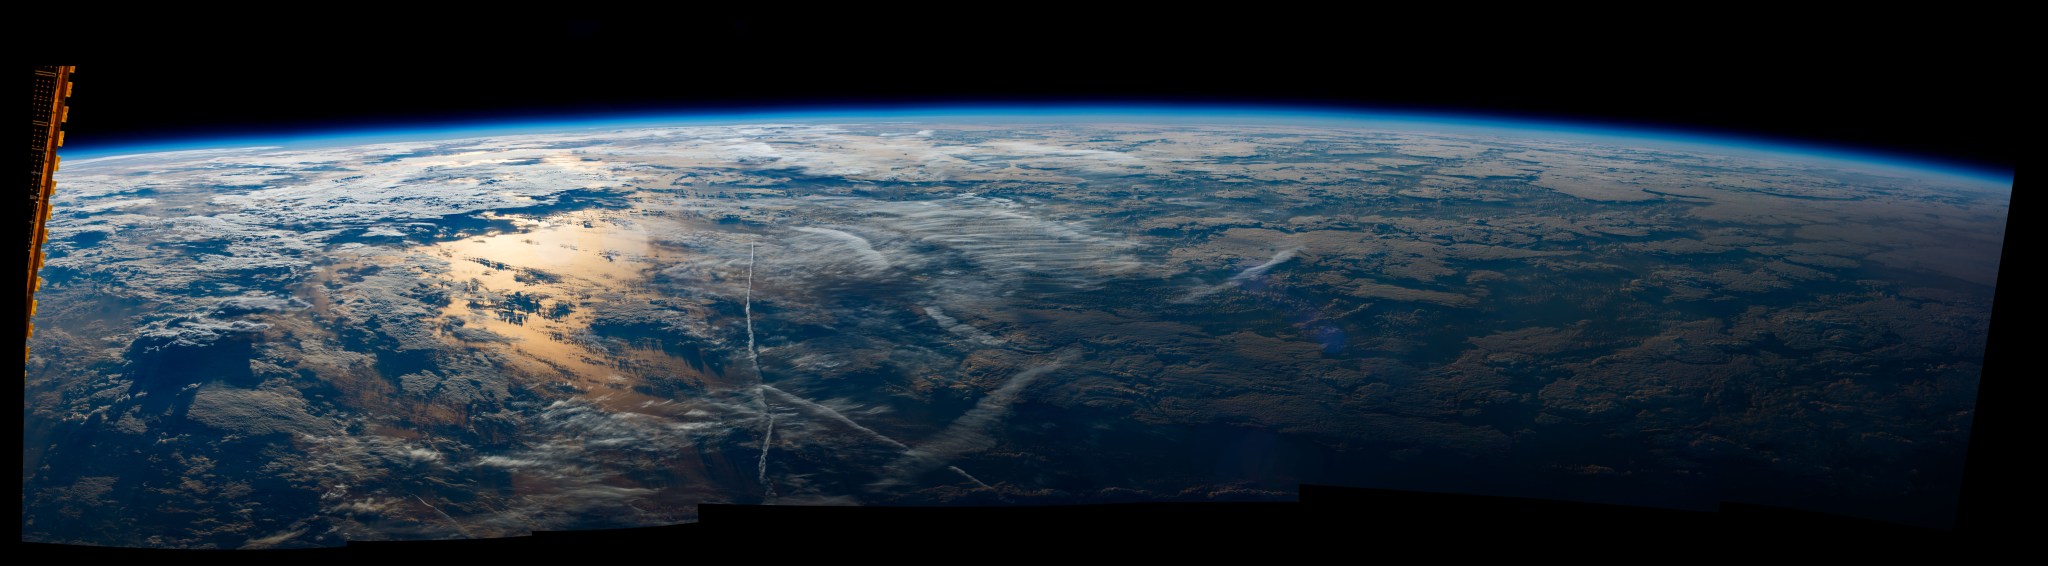 Earth seen from the International Space Station.